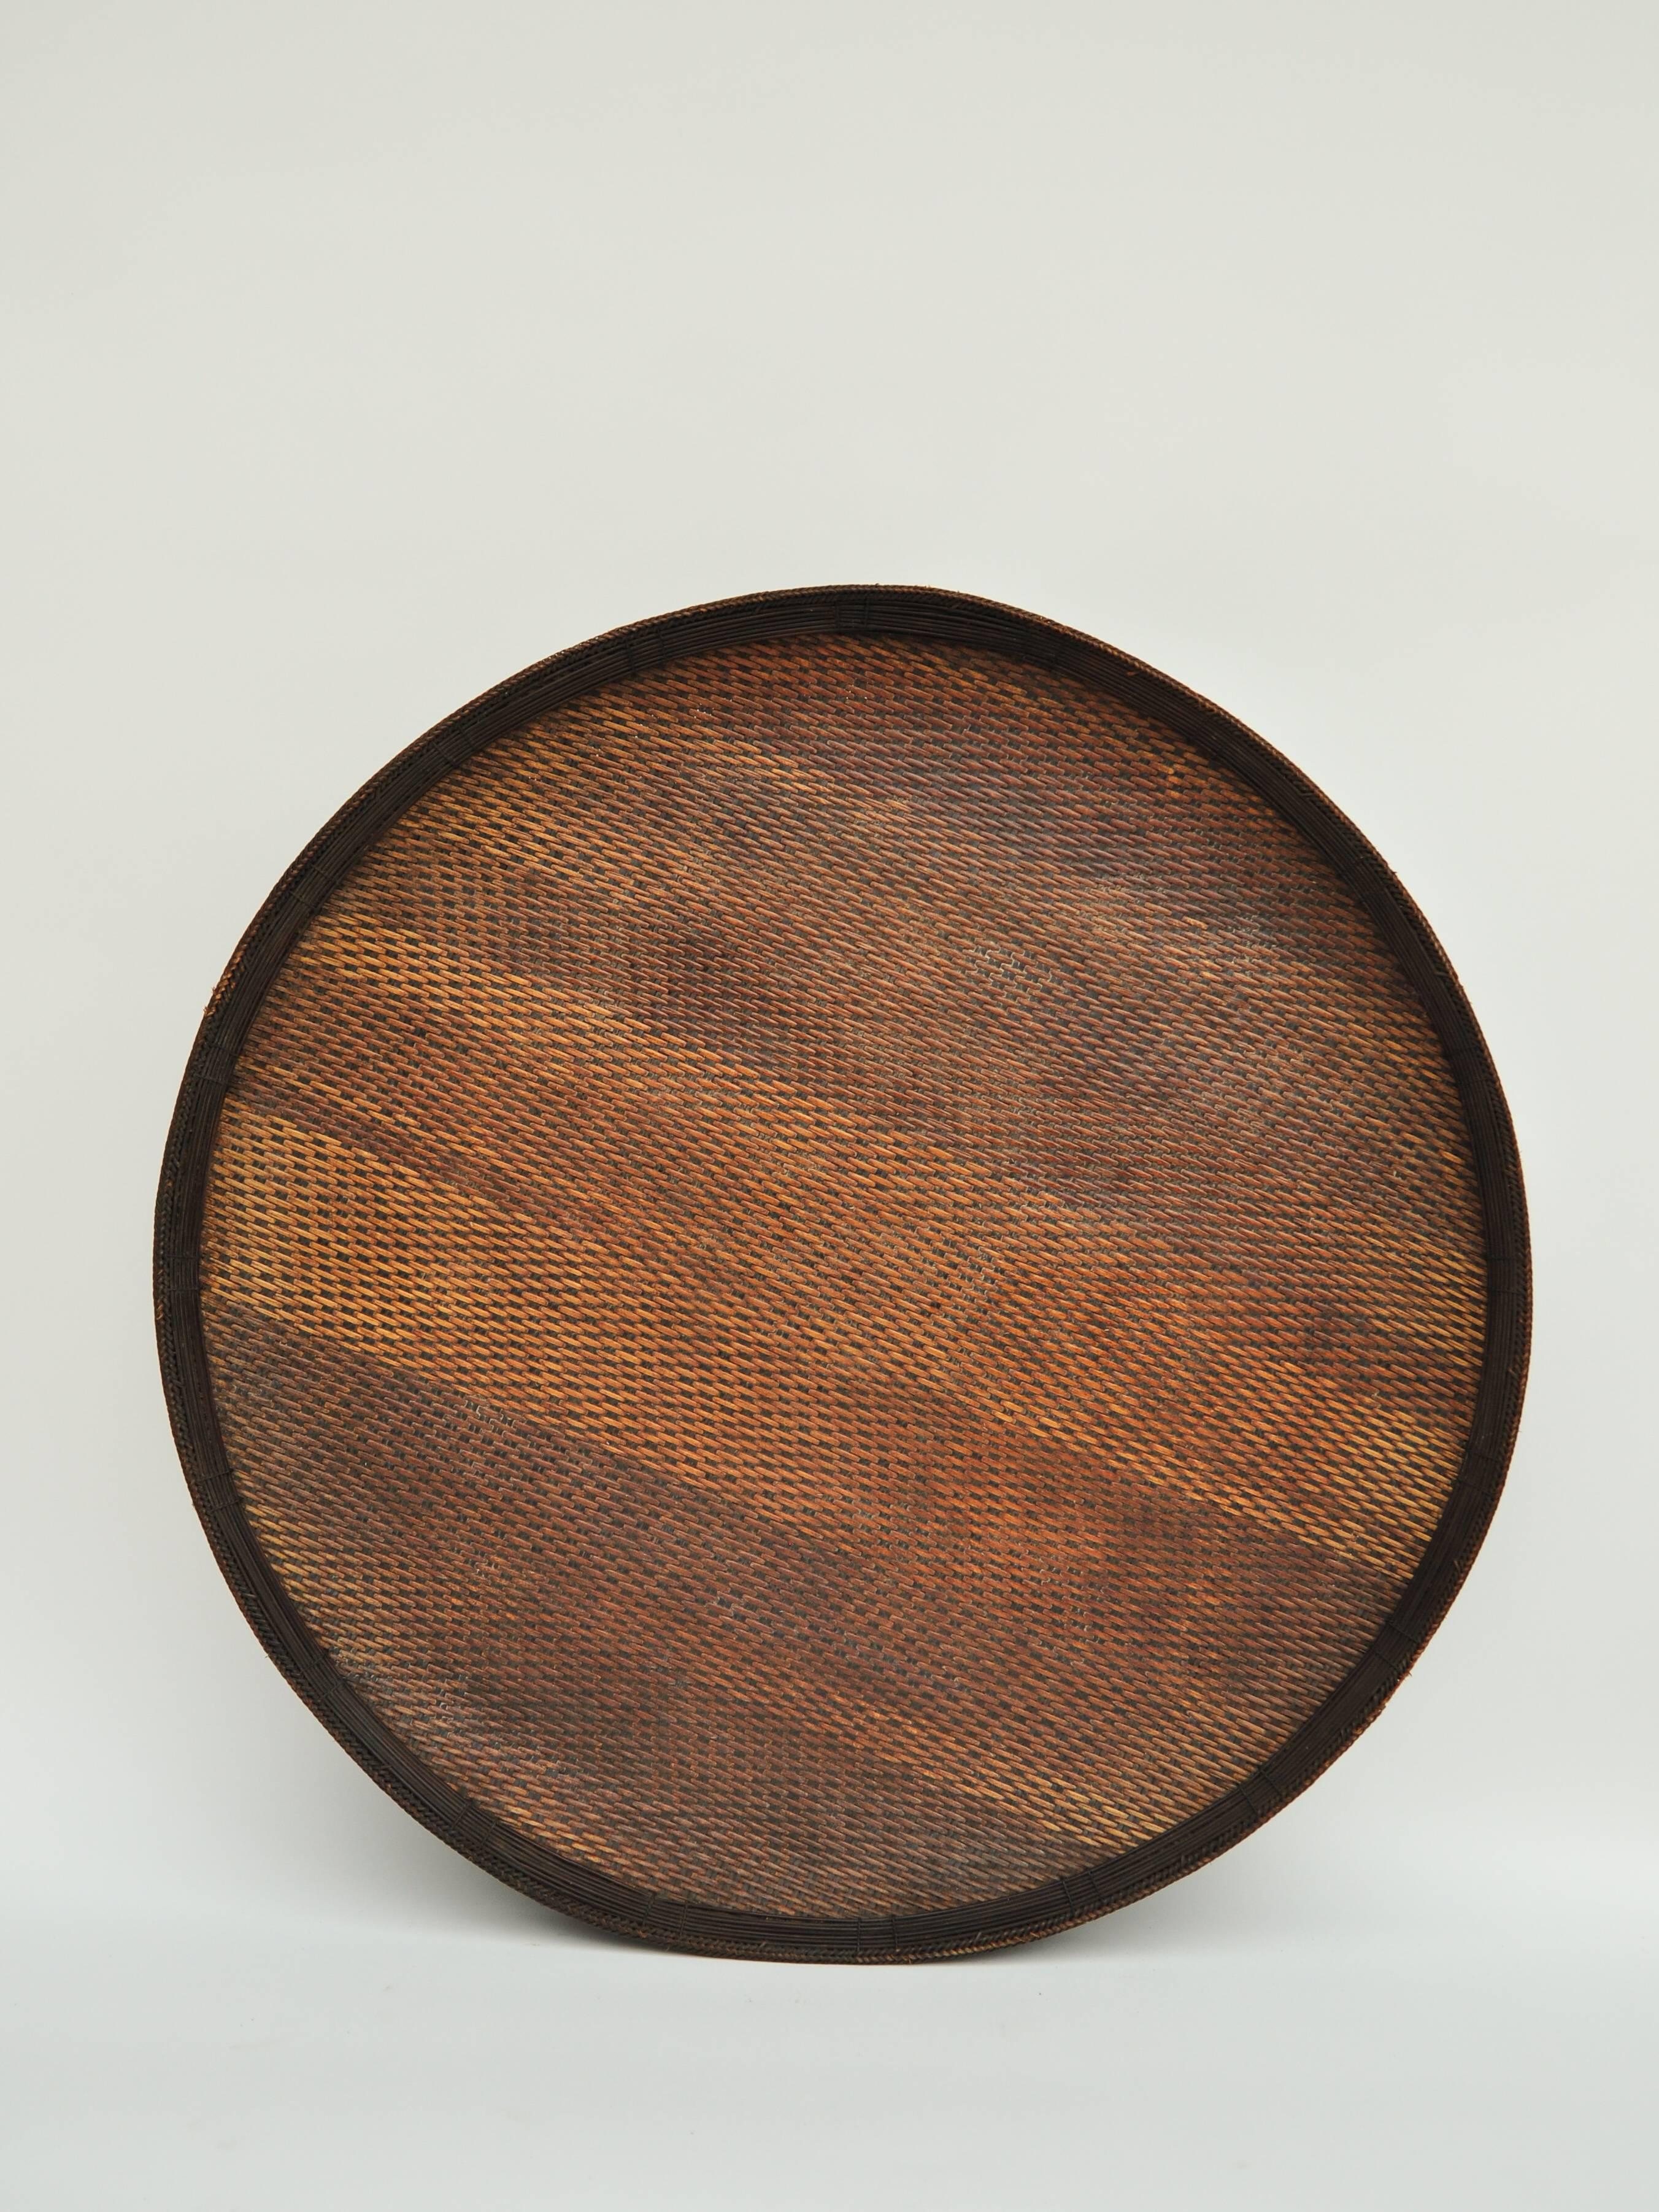 Tribal Large Bamboo and Rattan Basket Table or Tray, Laos, Mid-Late 20th Century